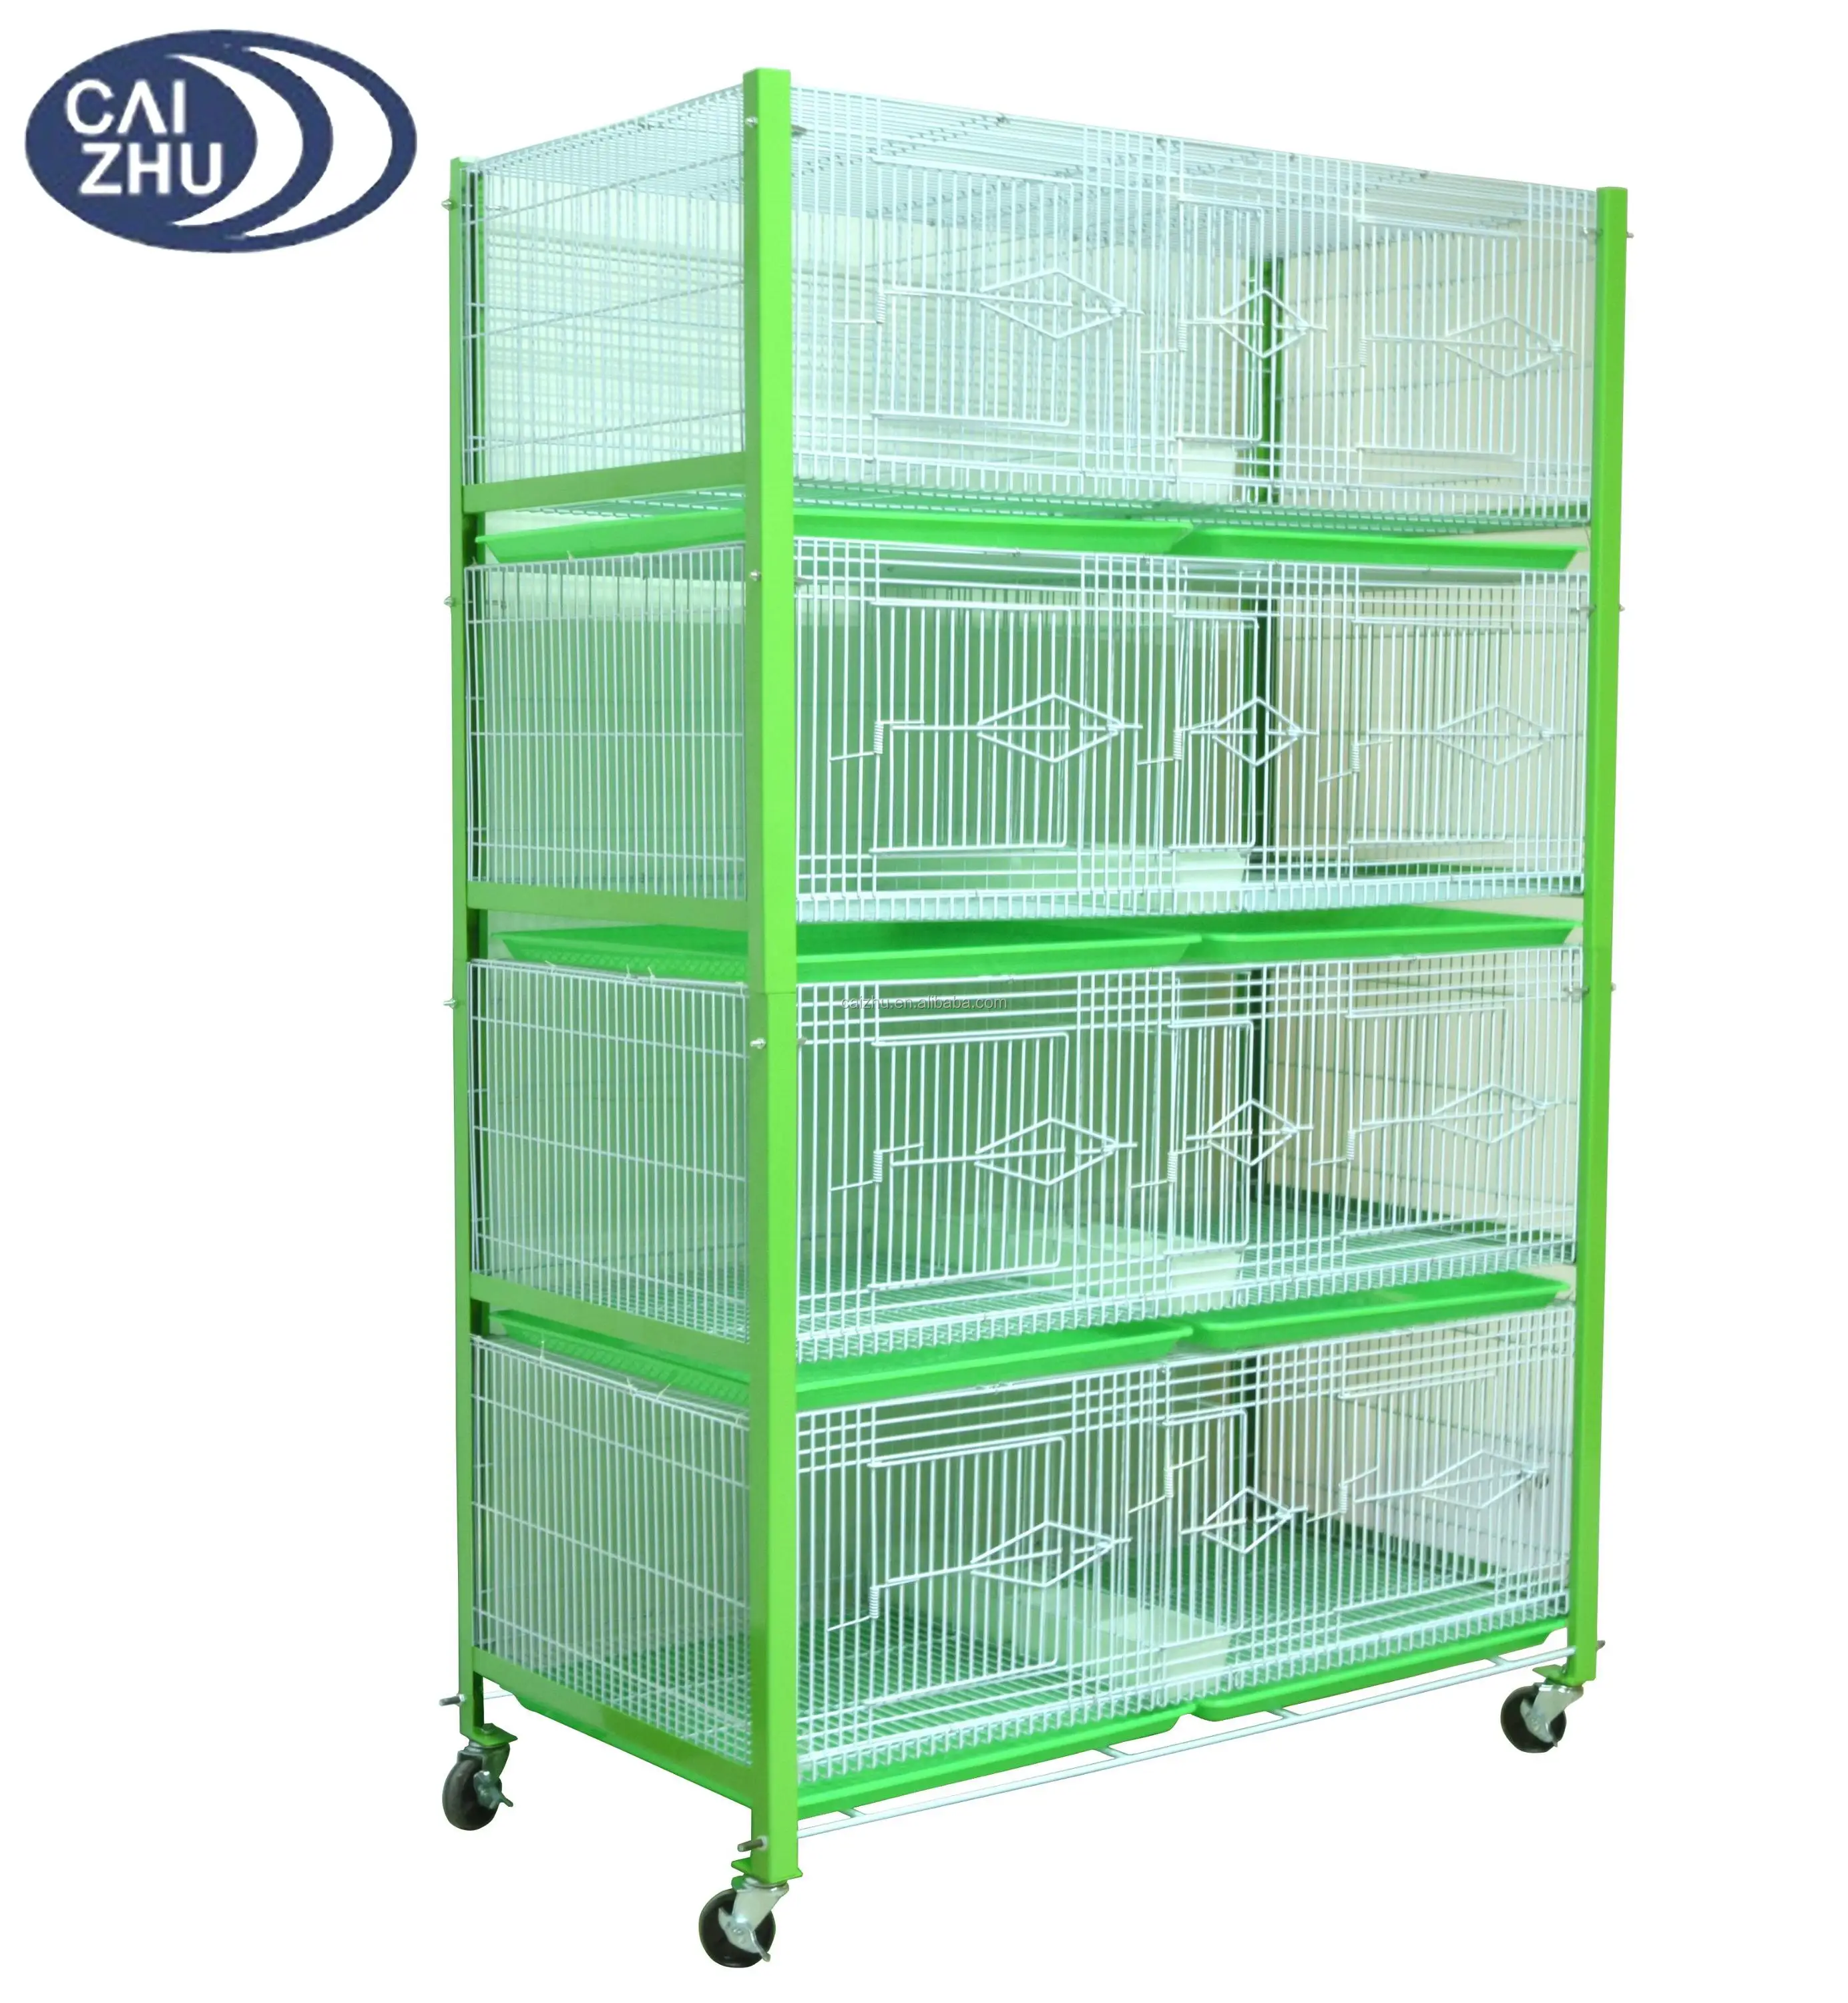 Caizhu New Made Four Tiers Pigeon Cages Pigeon Breeding